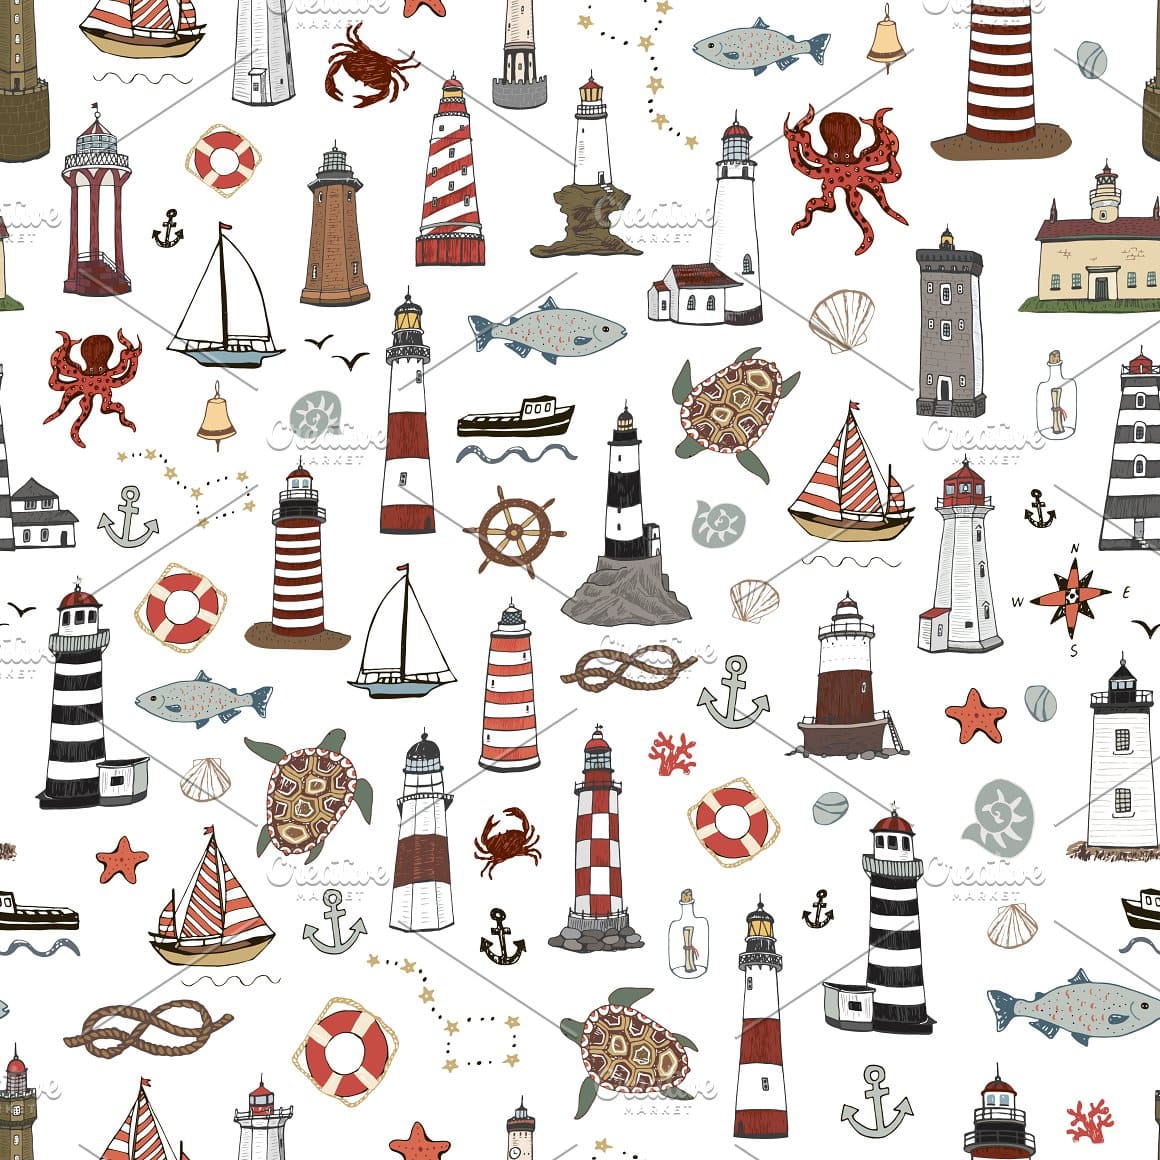 Constellations, shells, crabs, octopuses, lighthouses on a white background.